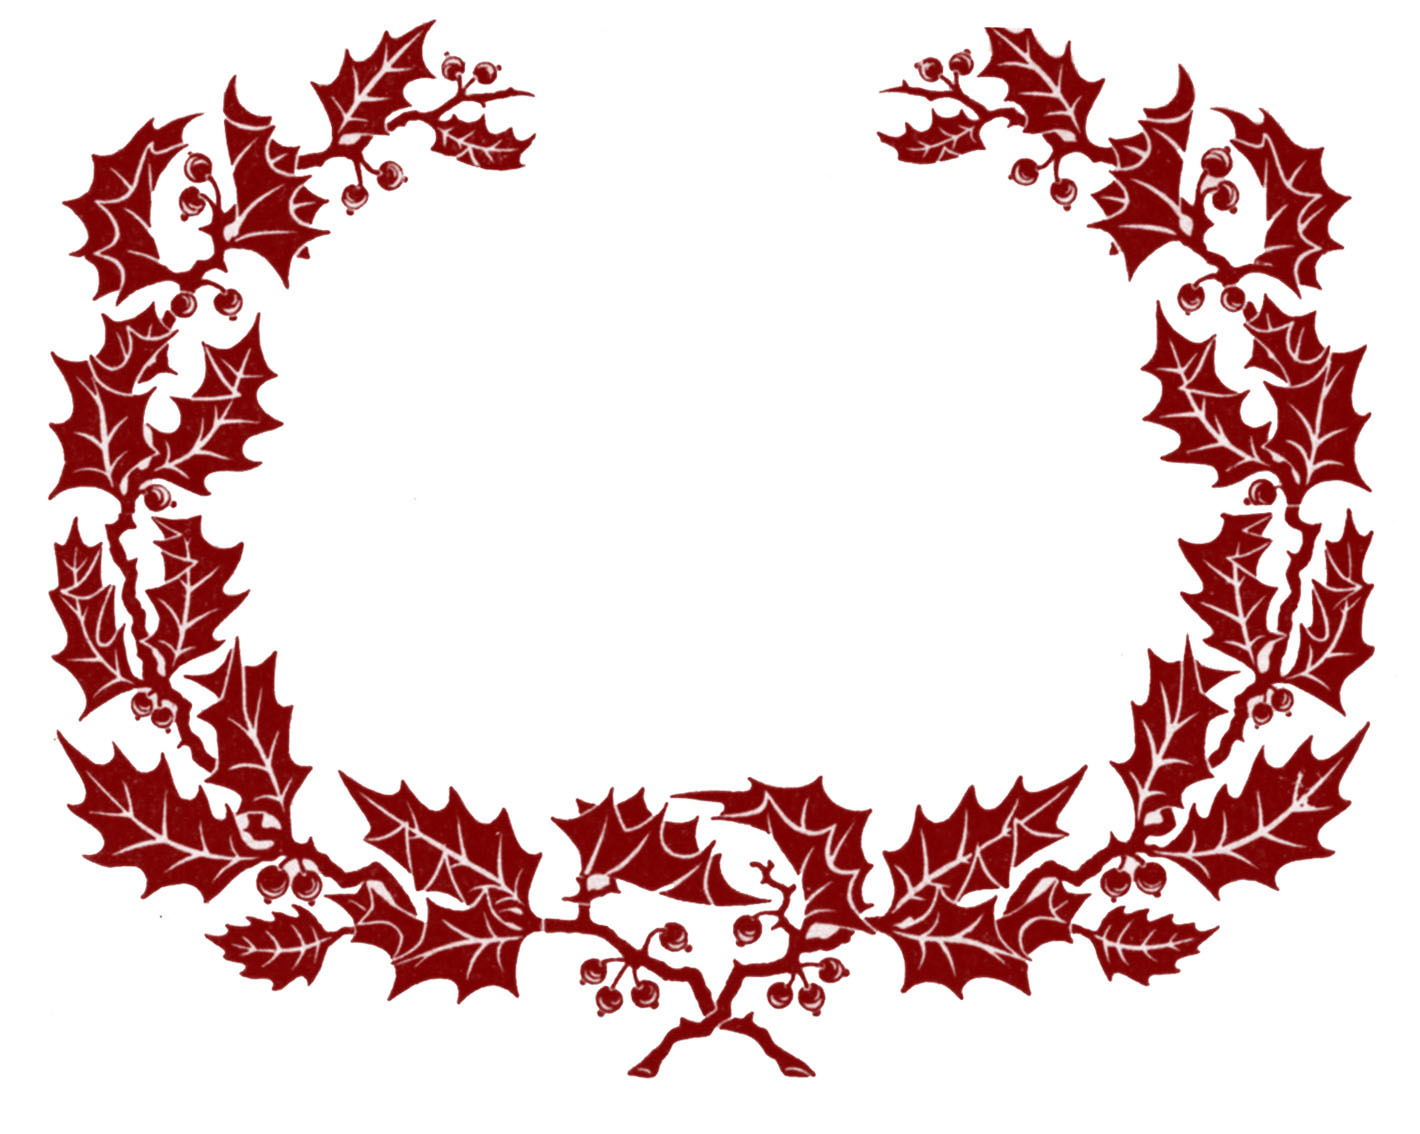 Wreath holly vintage image PPT Backgrounds